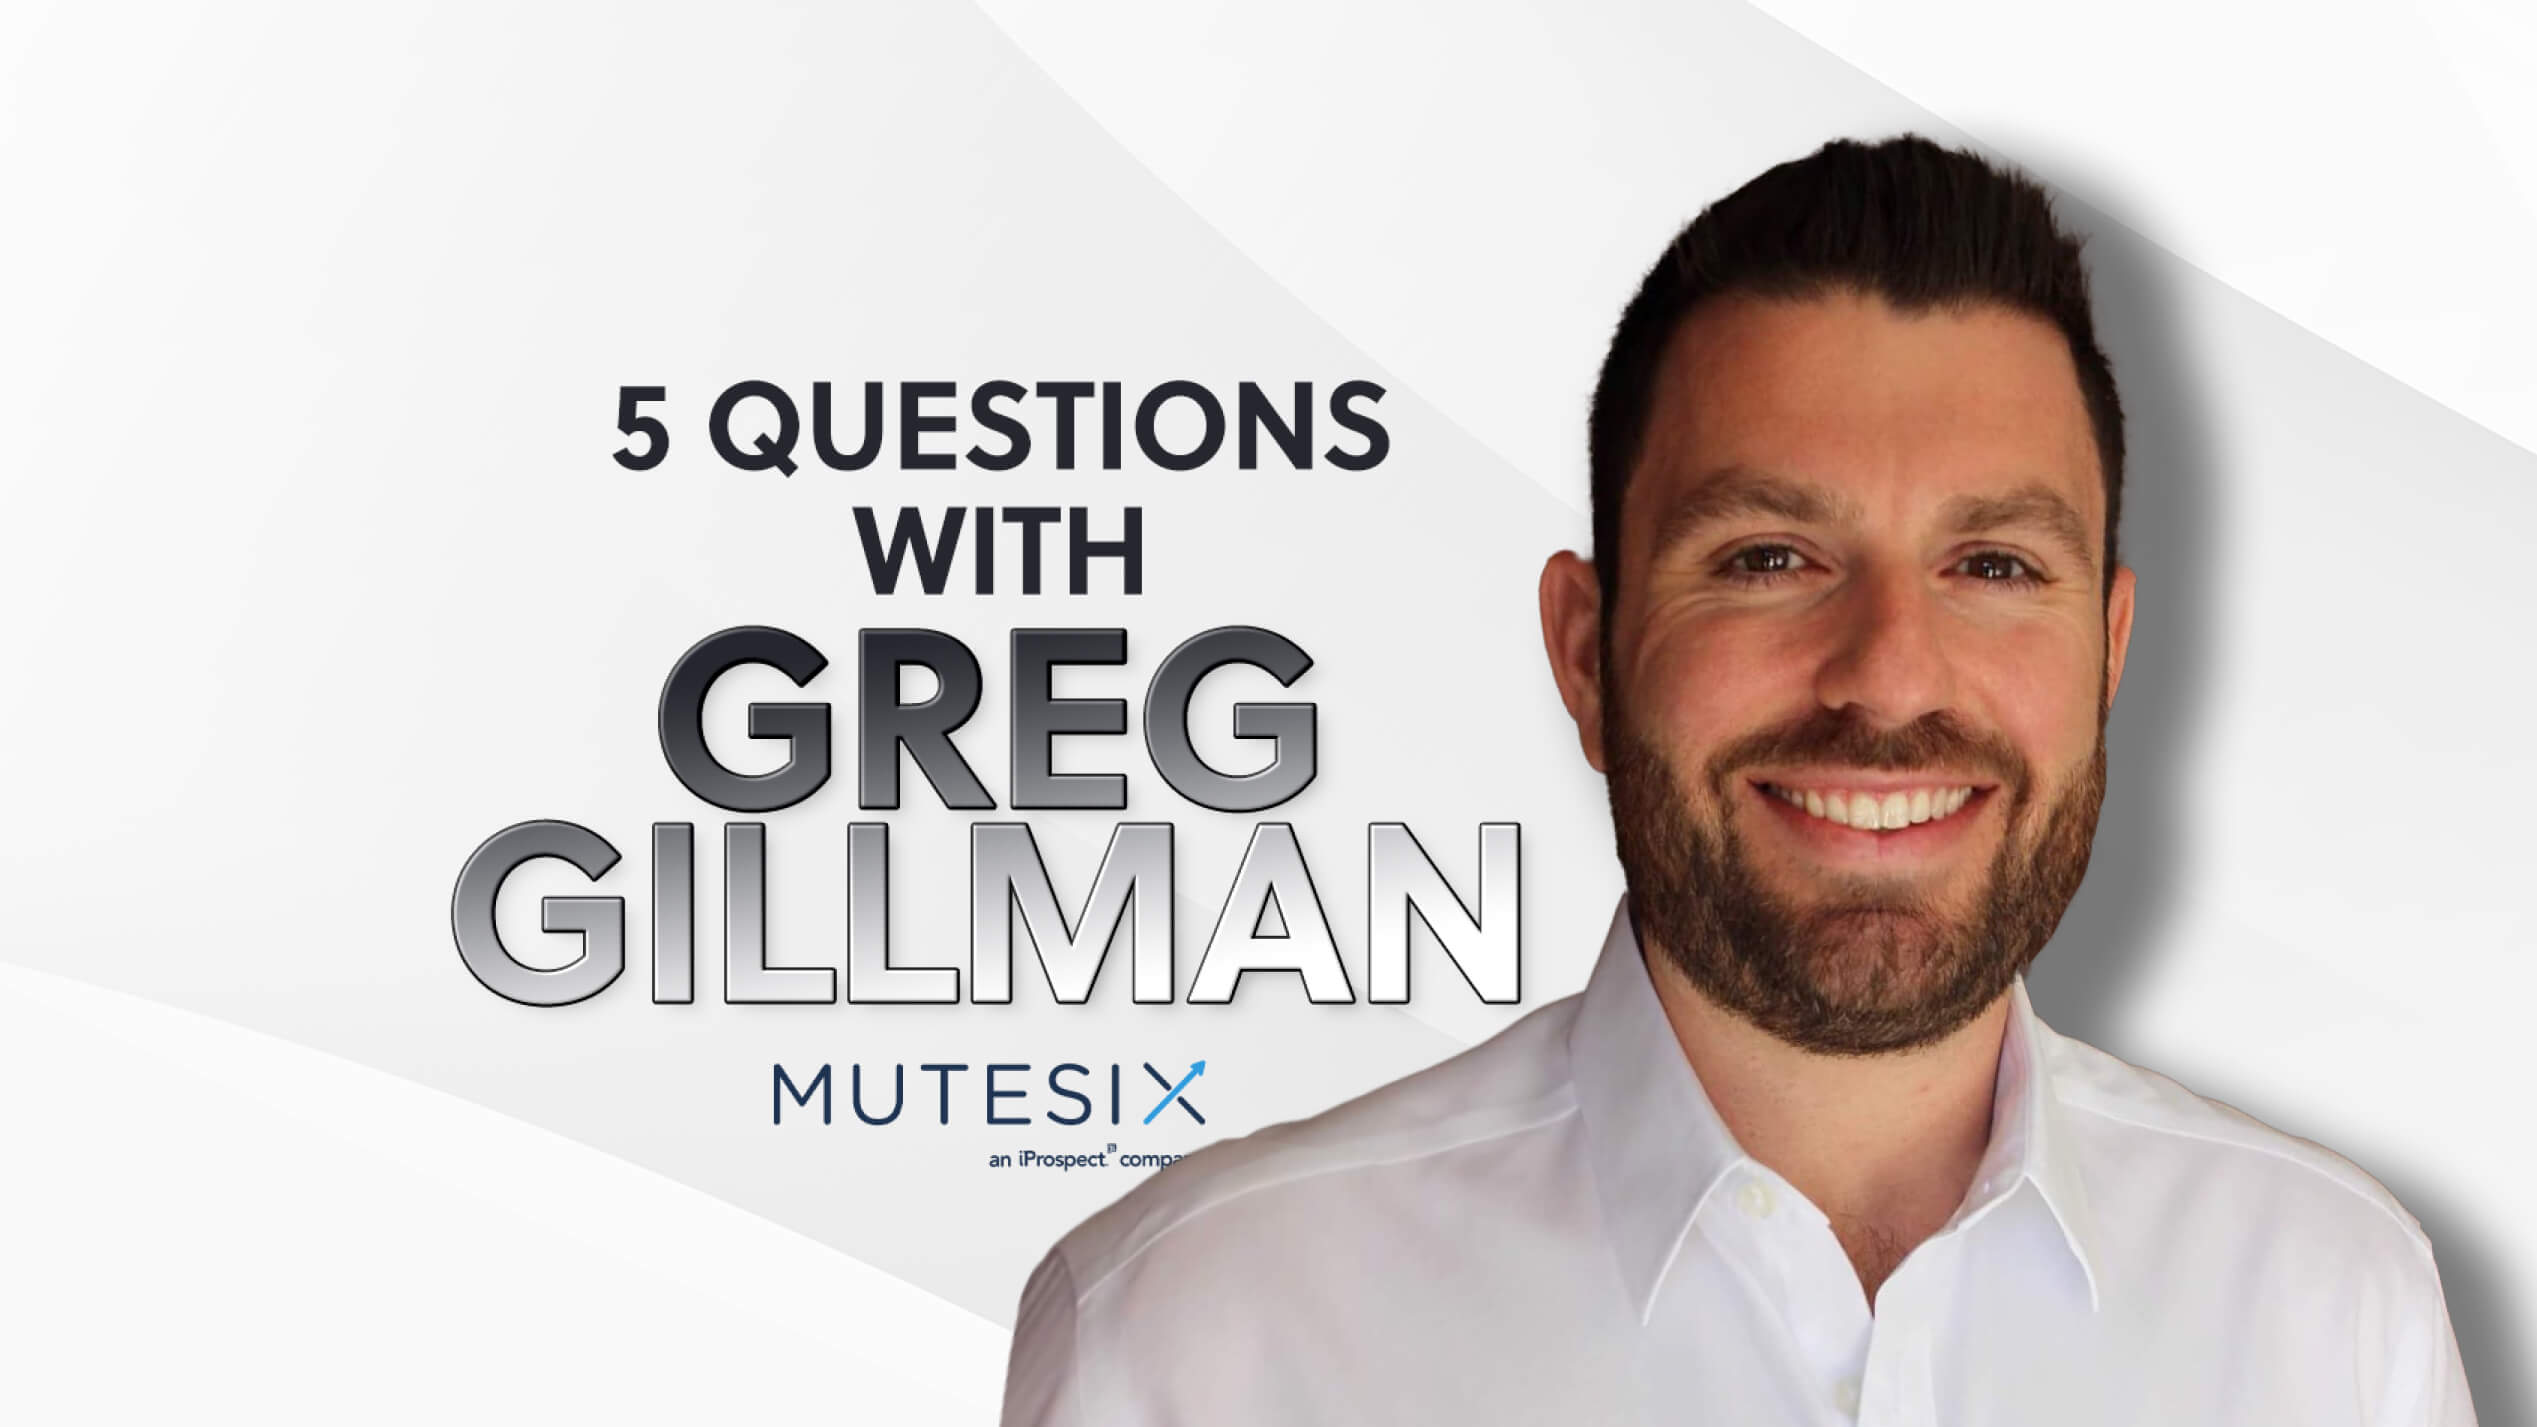 5 Questions With Greg Gillman of MuteSix: Facebook Ad Strategies and the Secret to Videos That Convert